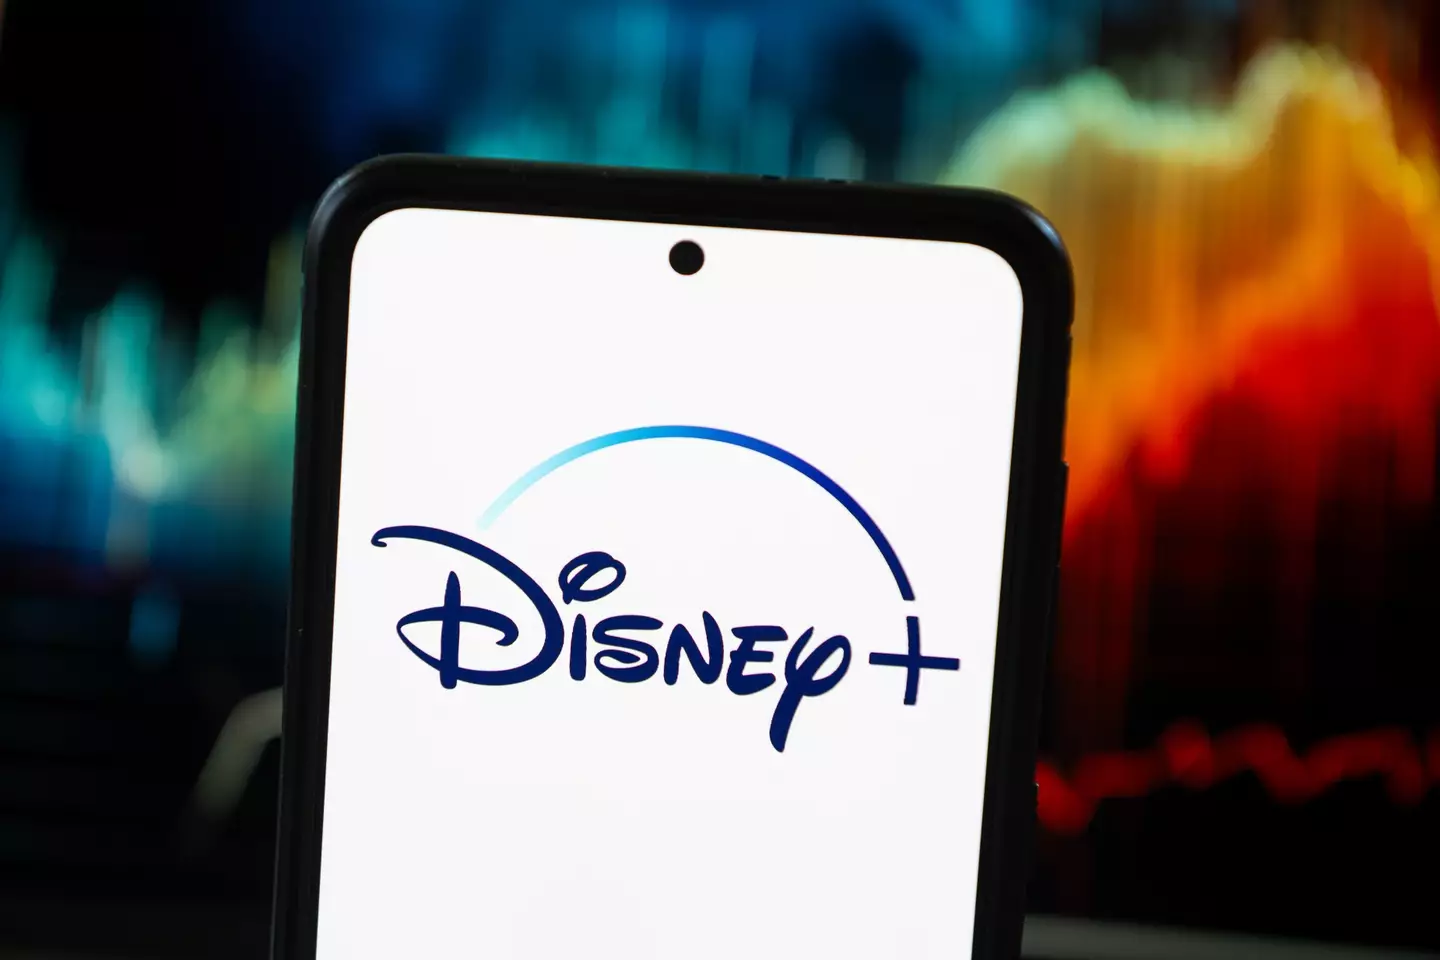 Disney+ is one of the largest streaming platforms in the world.